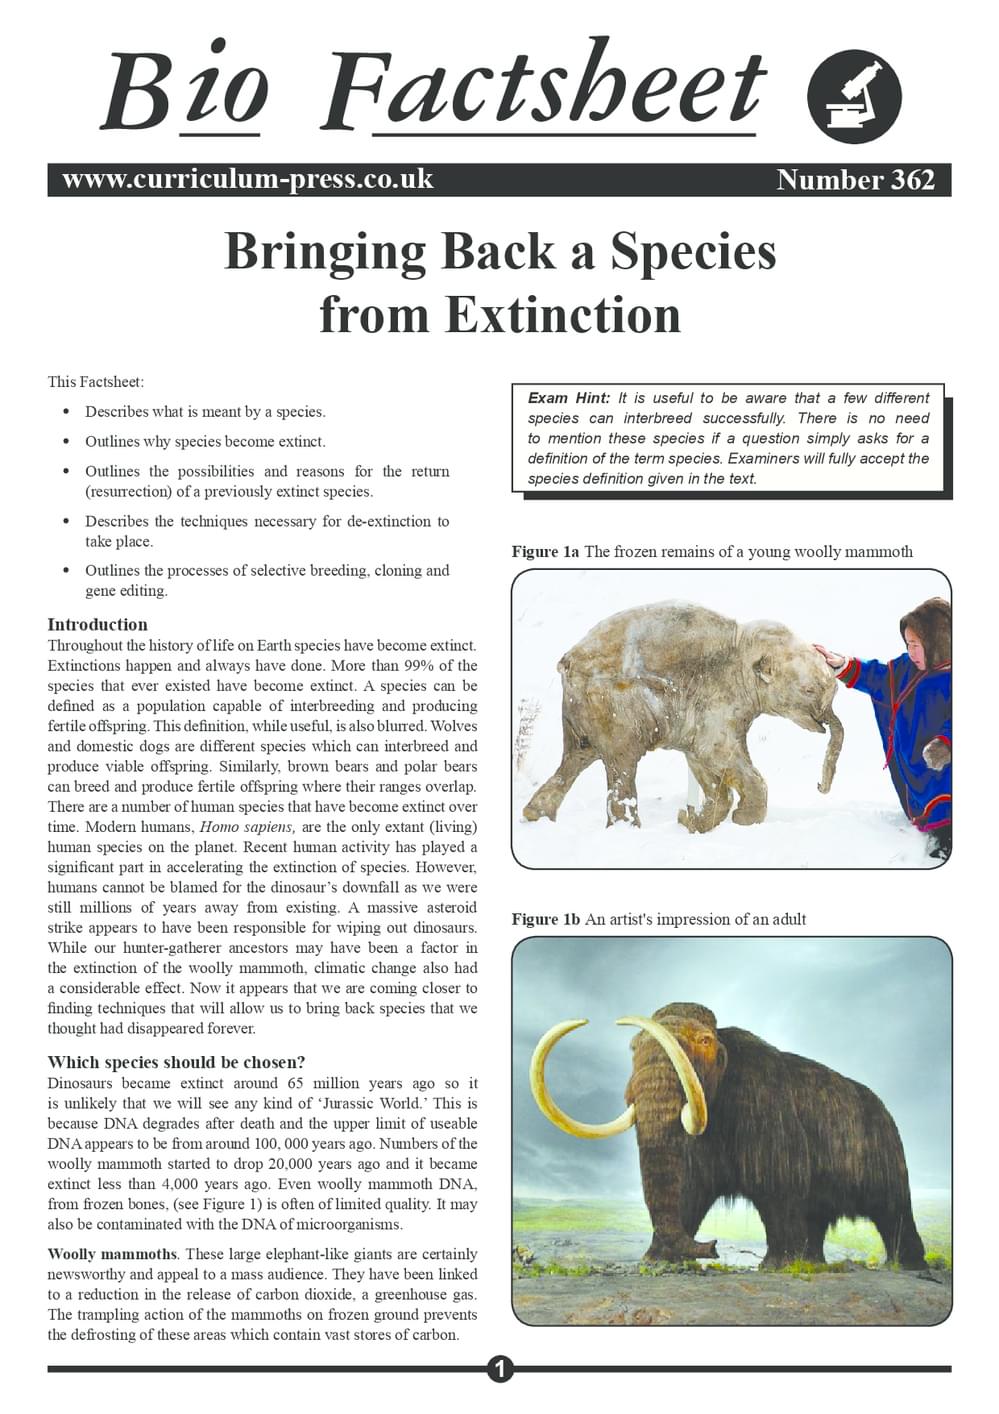 Bringing Back a Species from Extinction - Curriculum Press